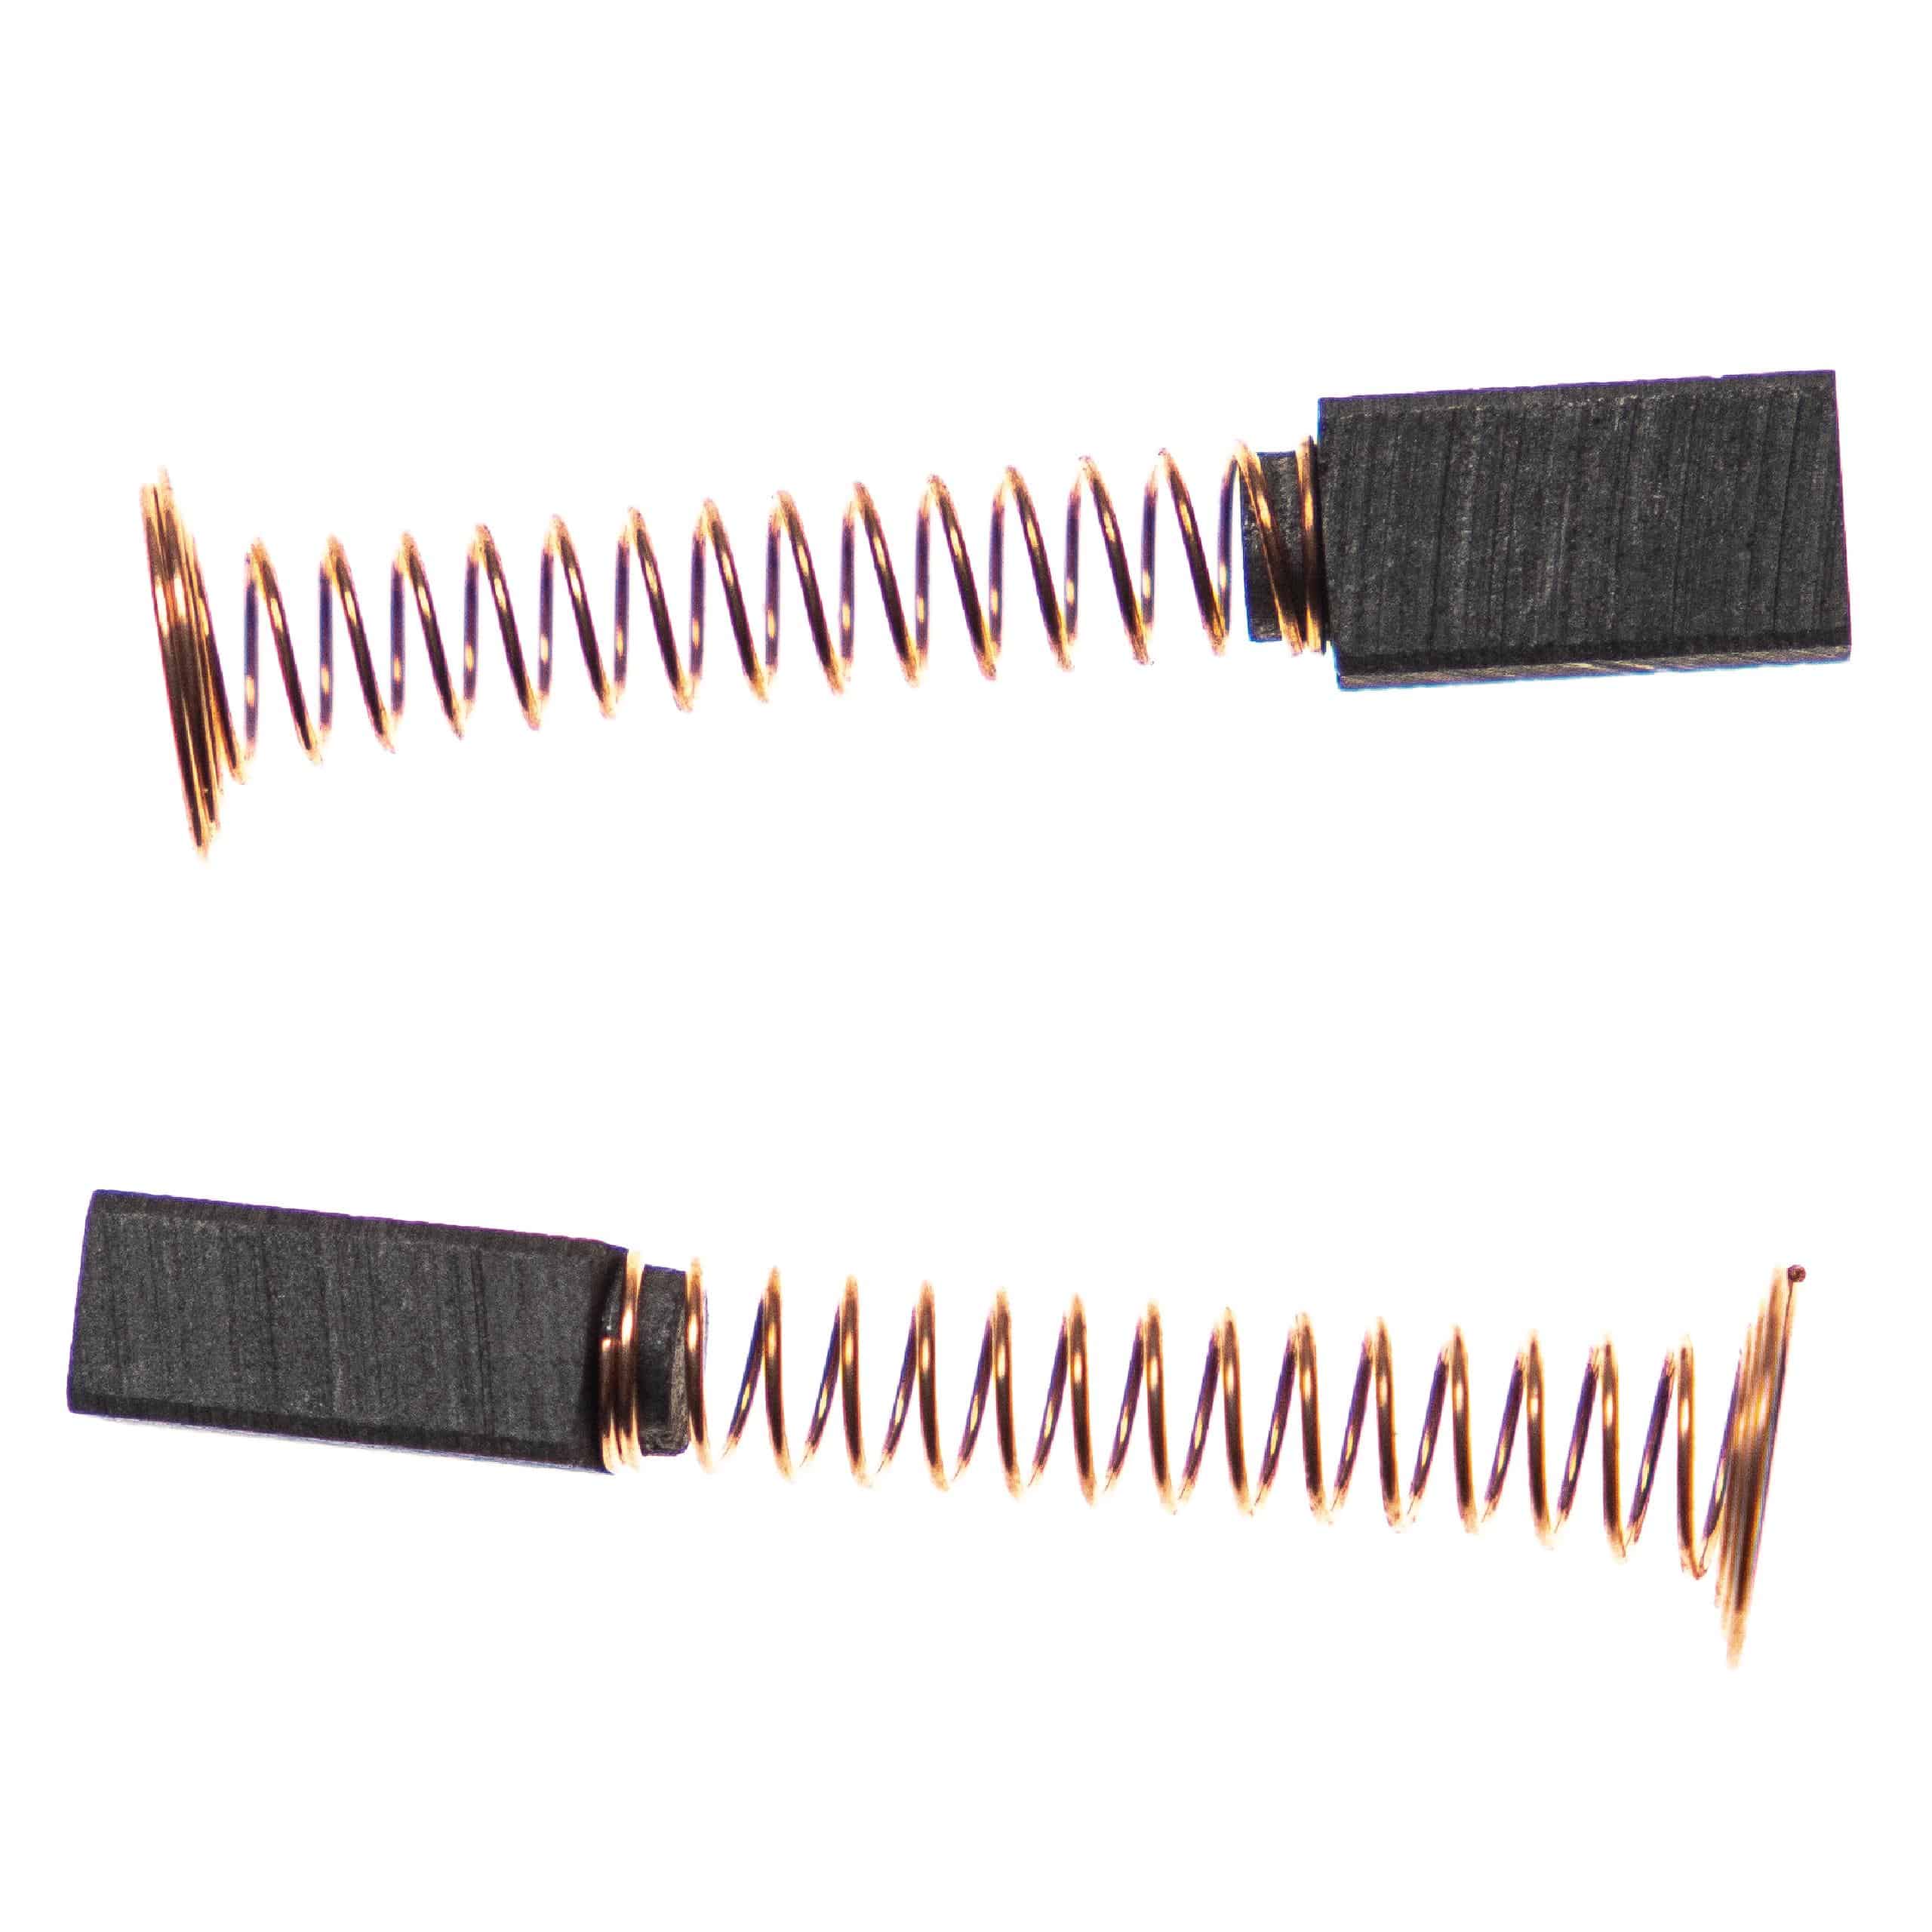 2x Carbon Brush as Replacement for Dremel DREM1 Electric Power Tools + Spring, 11 x 6 x 4.75mm